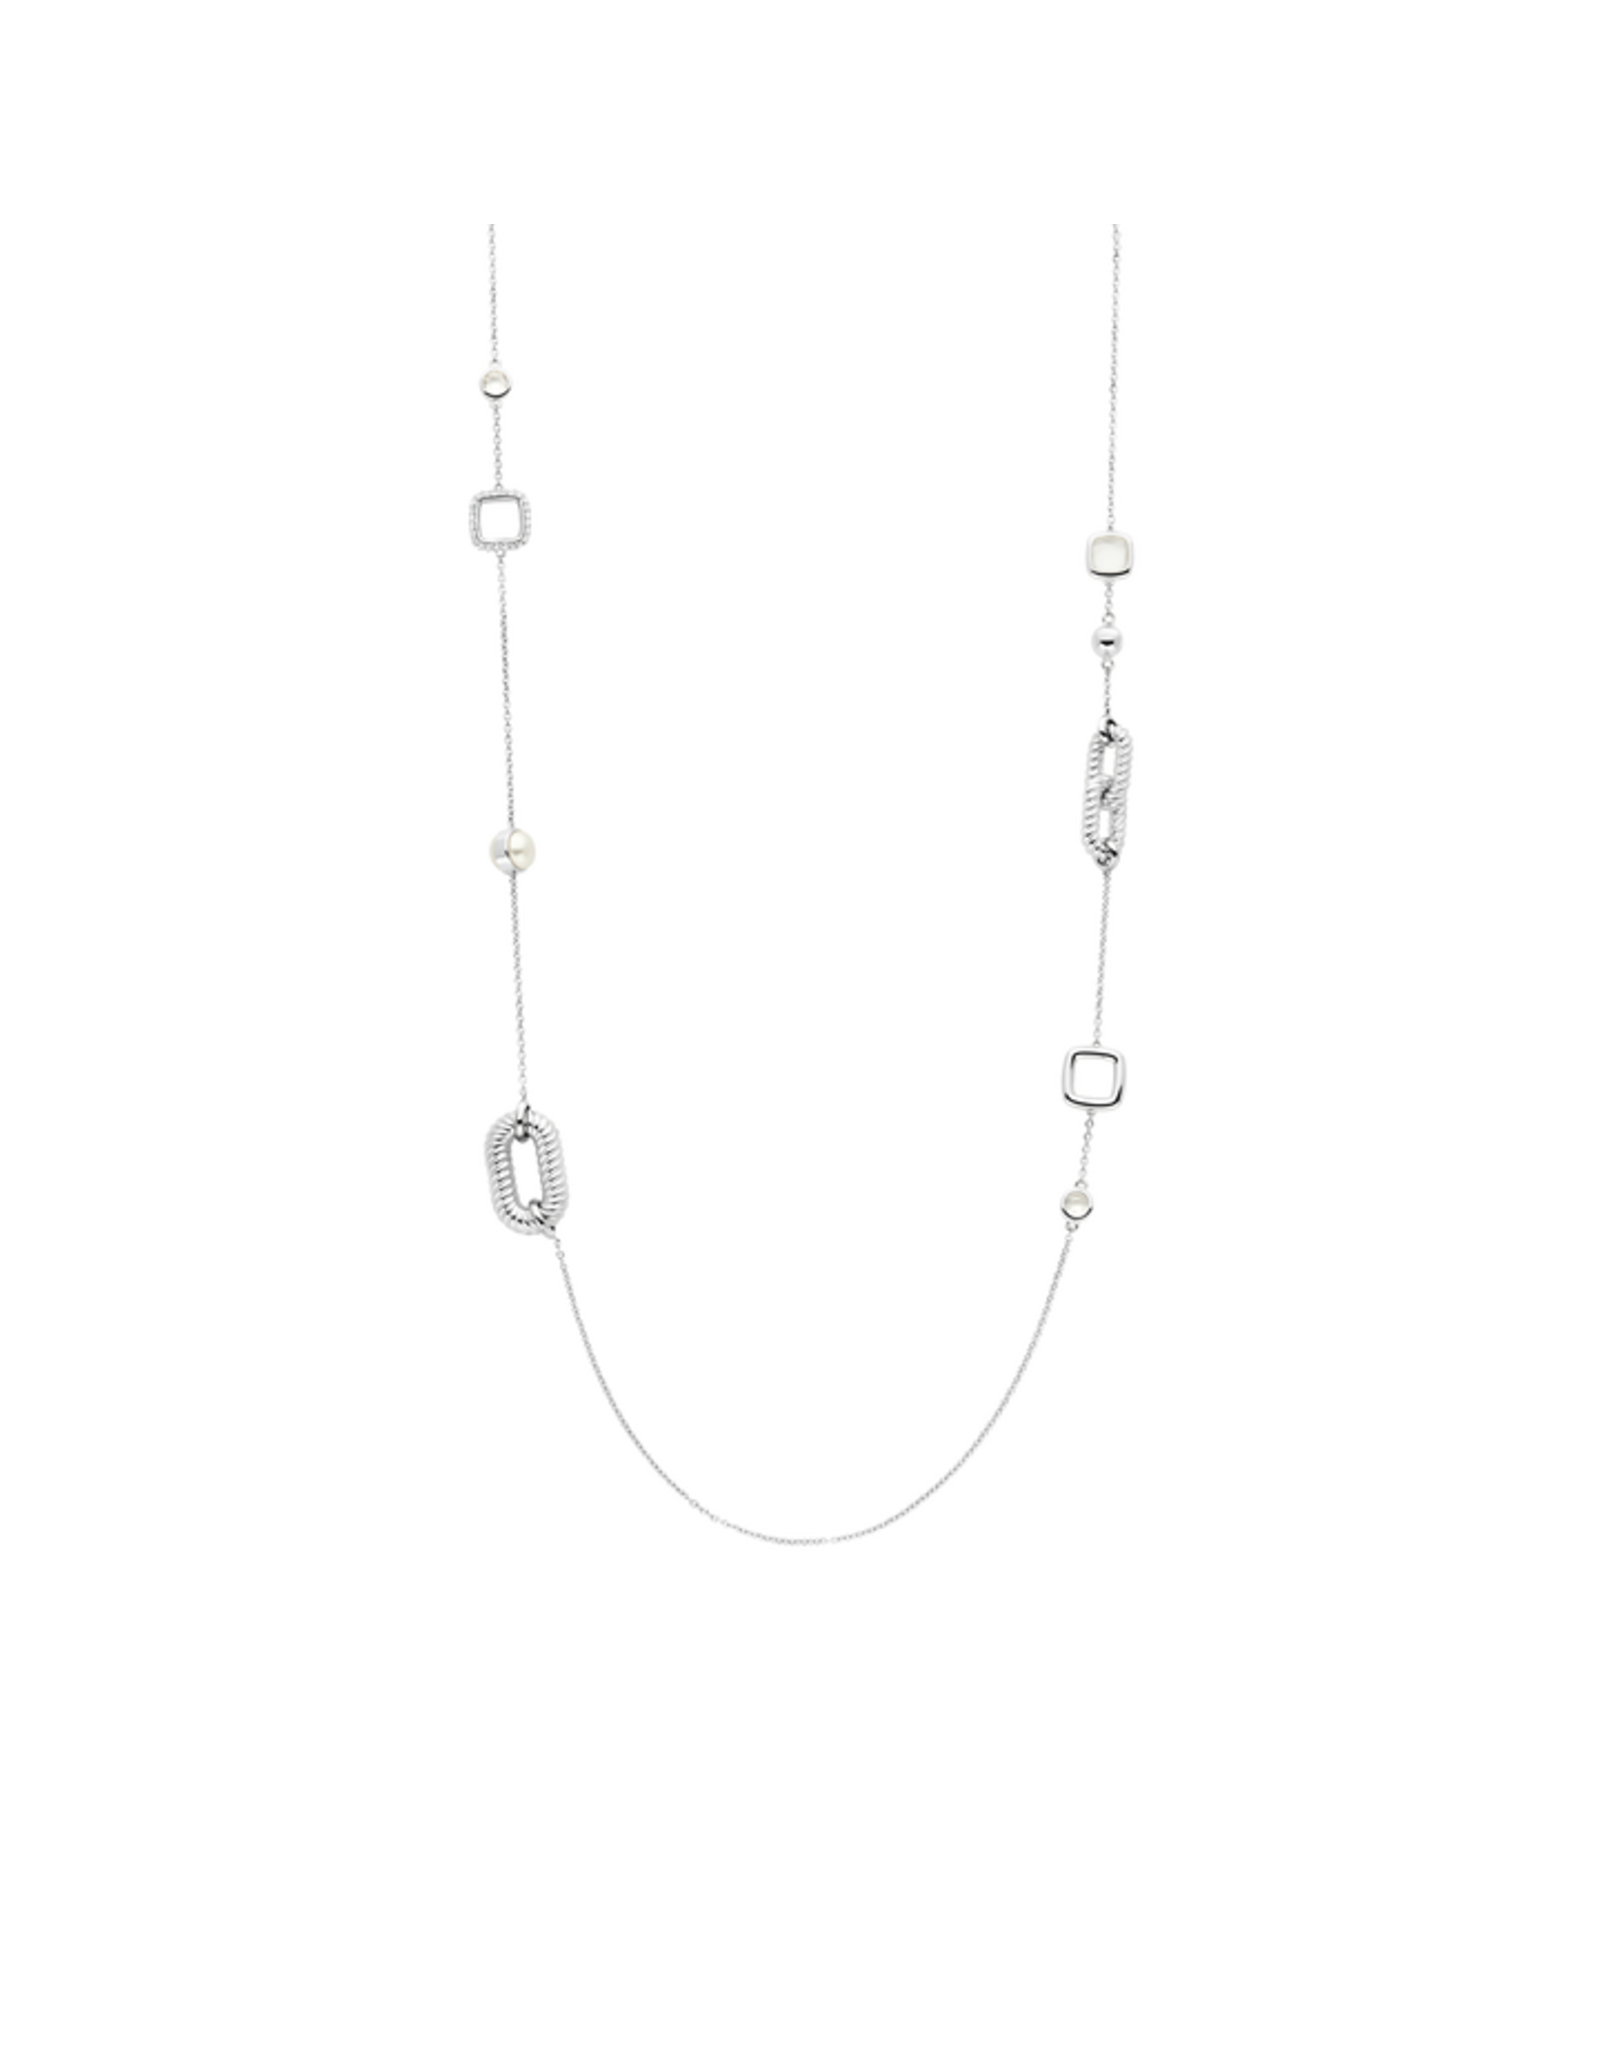 Long Silver Accented Necklace